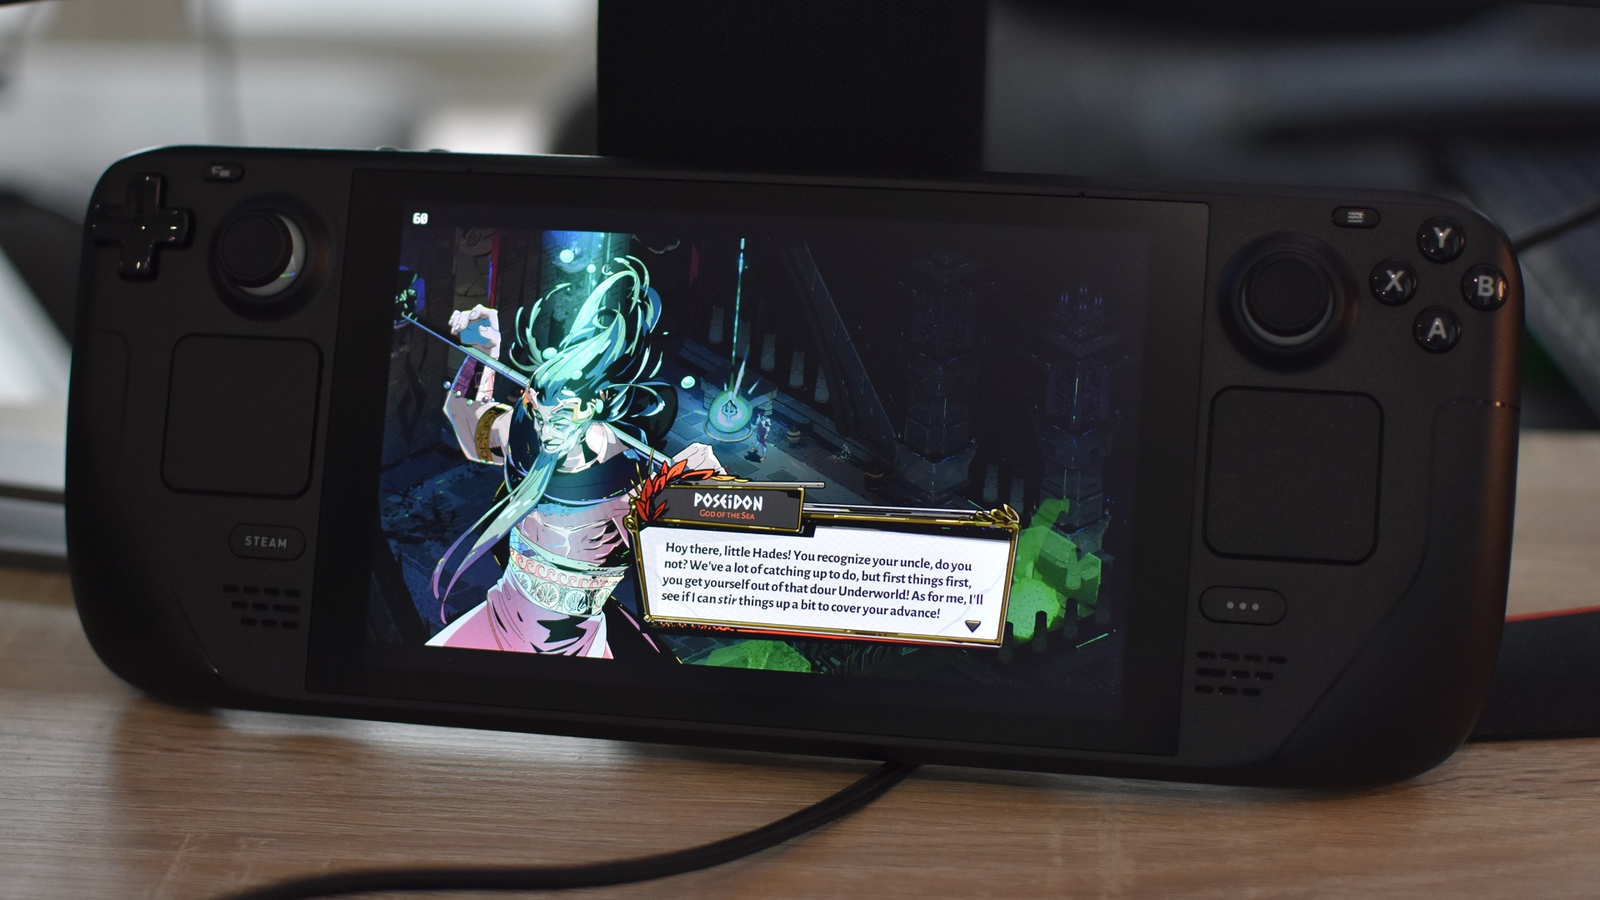 I guess there's no need to own a Nintendo Switch now? : r/SteamDeck